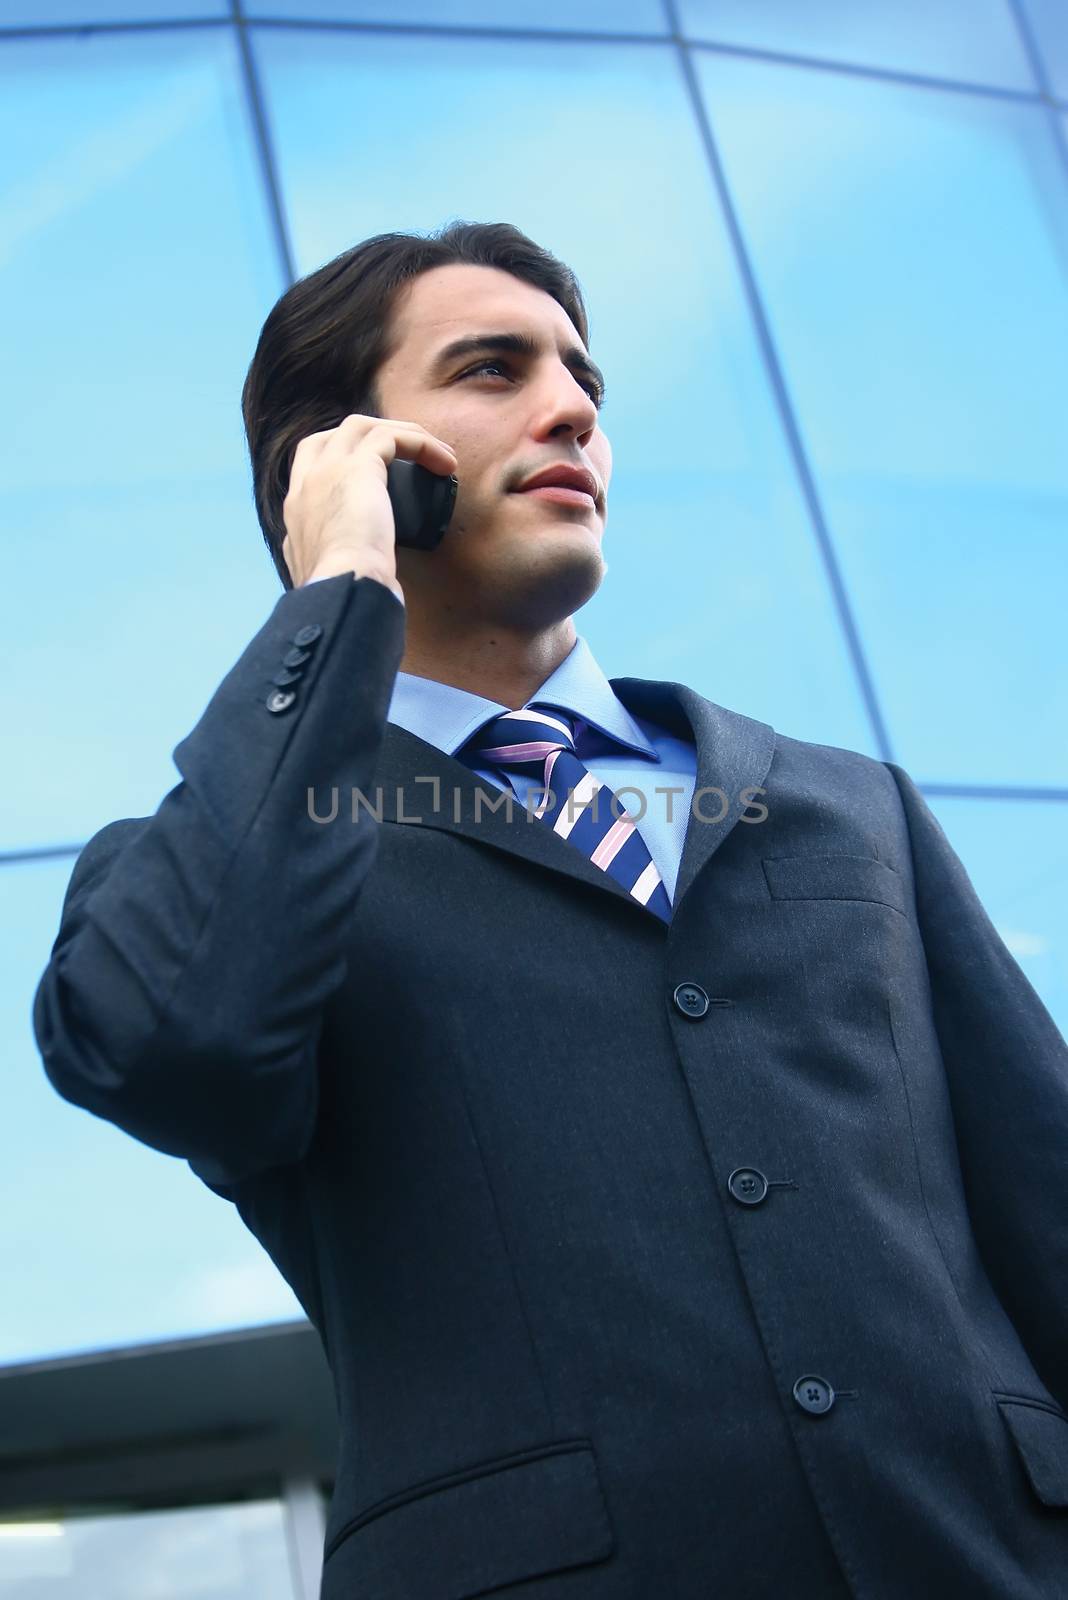 a businessman using mobile phone b by toocan